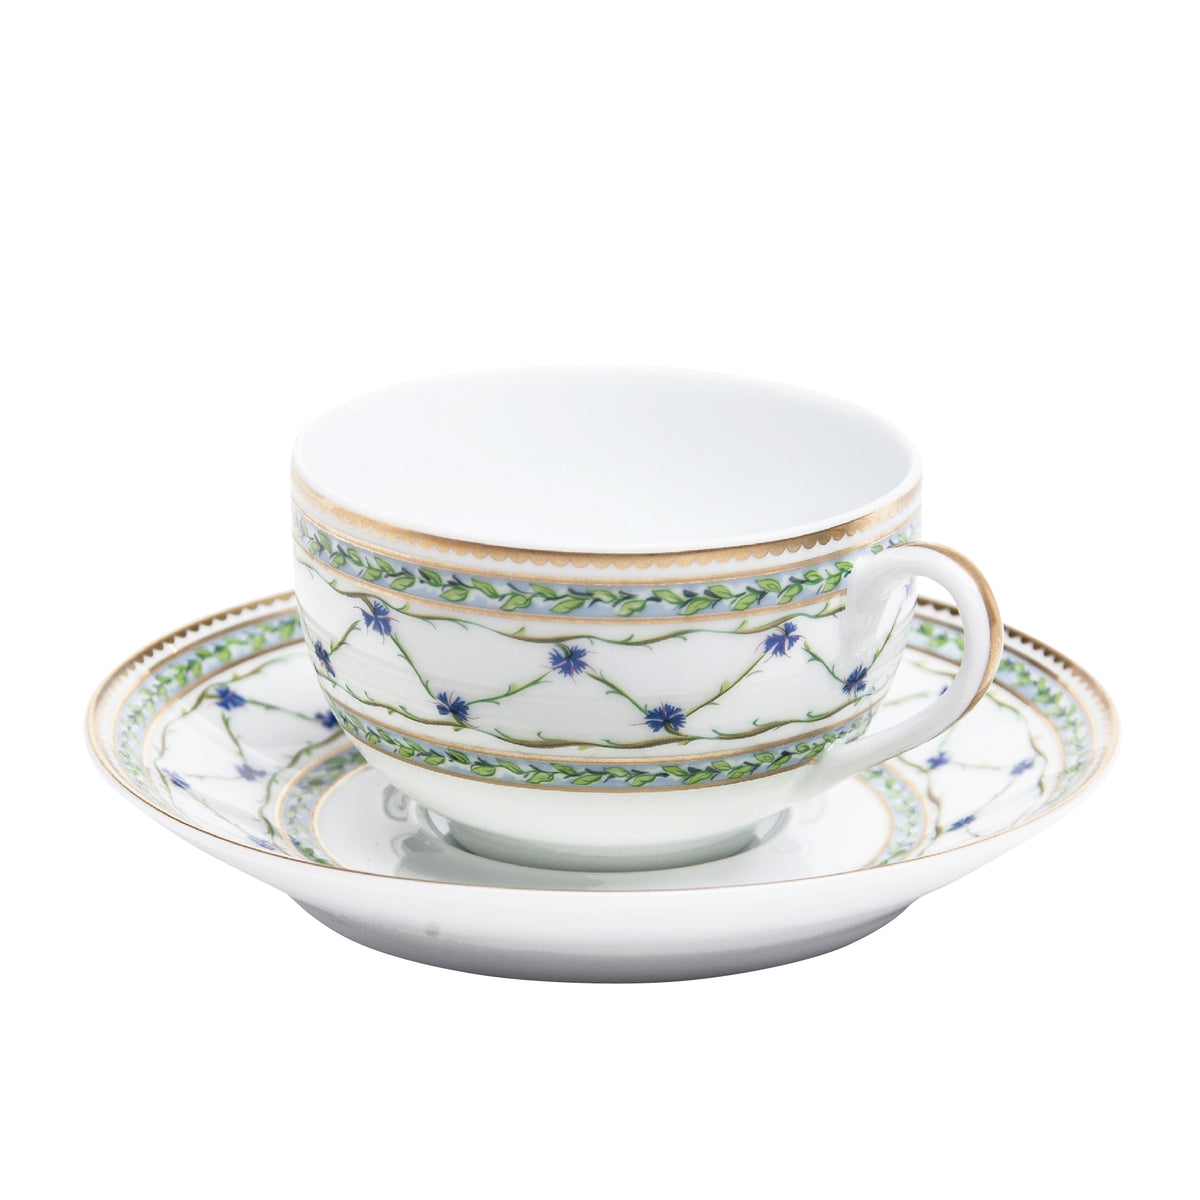 Allee Royale Tea Cup and Saucer